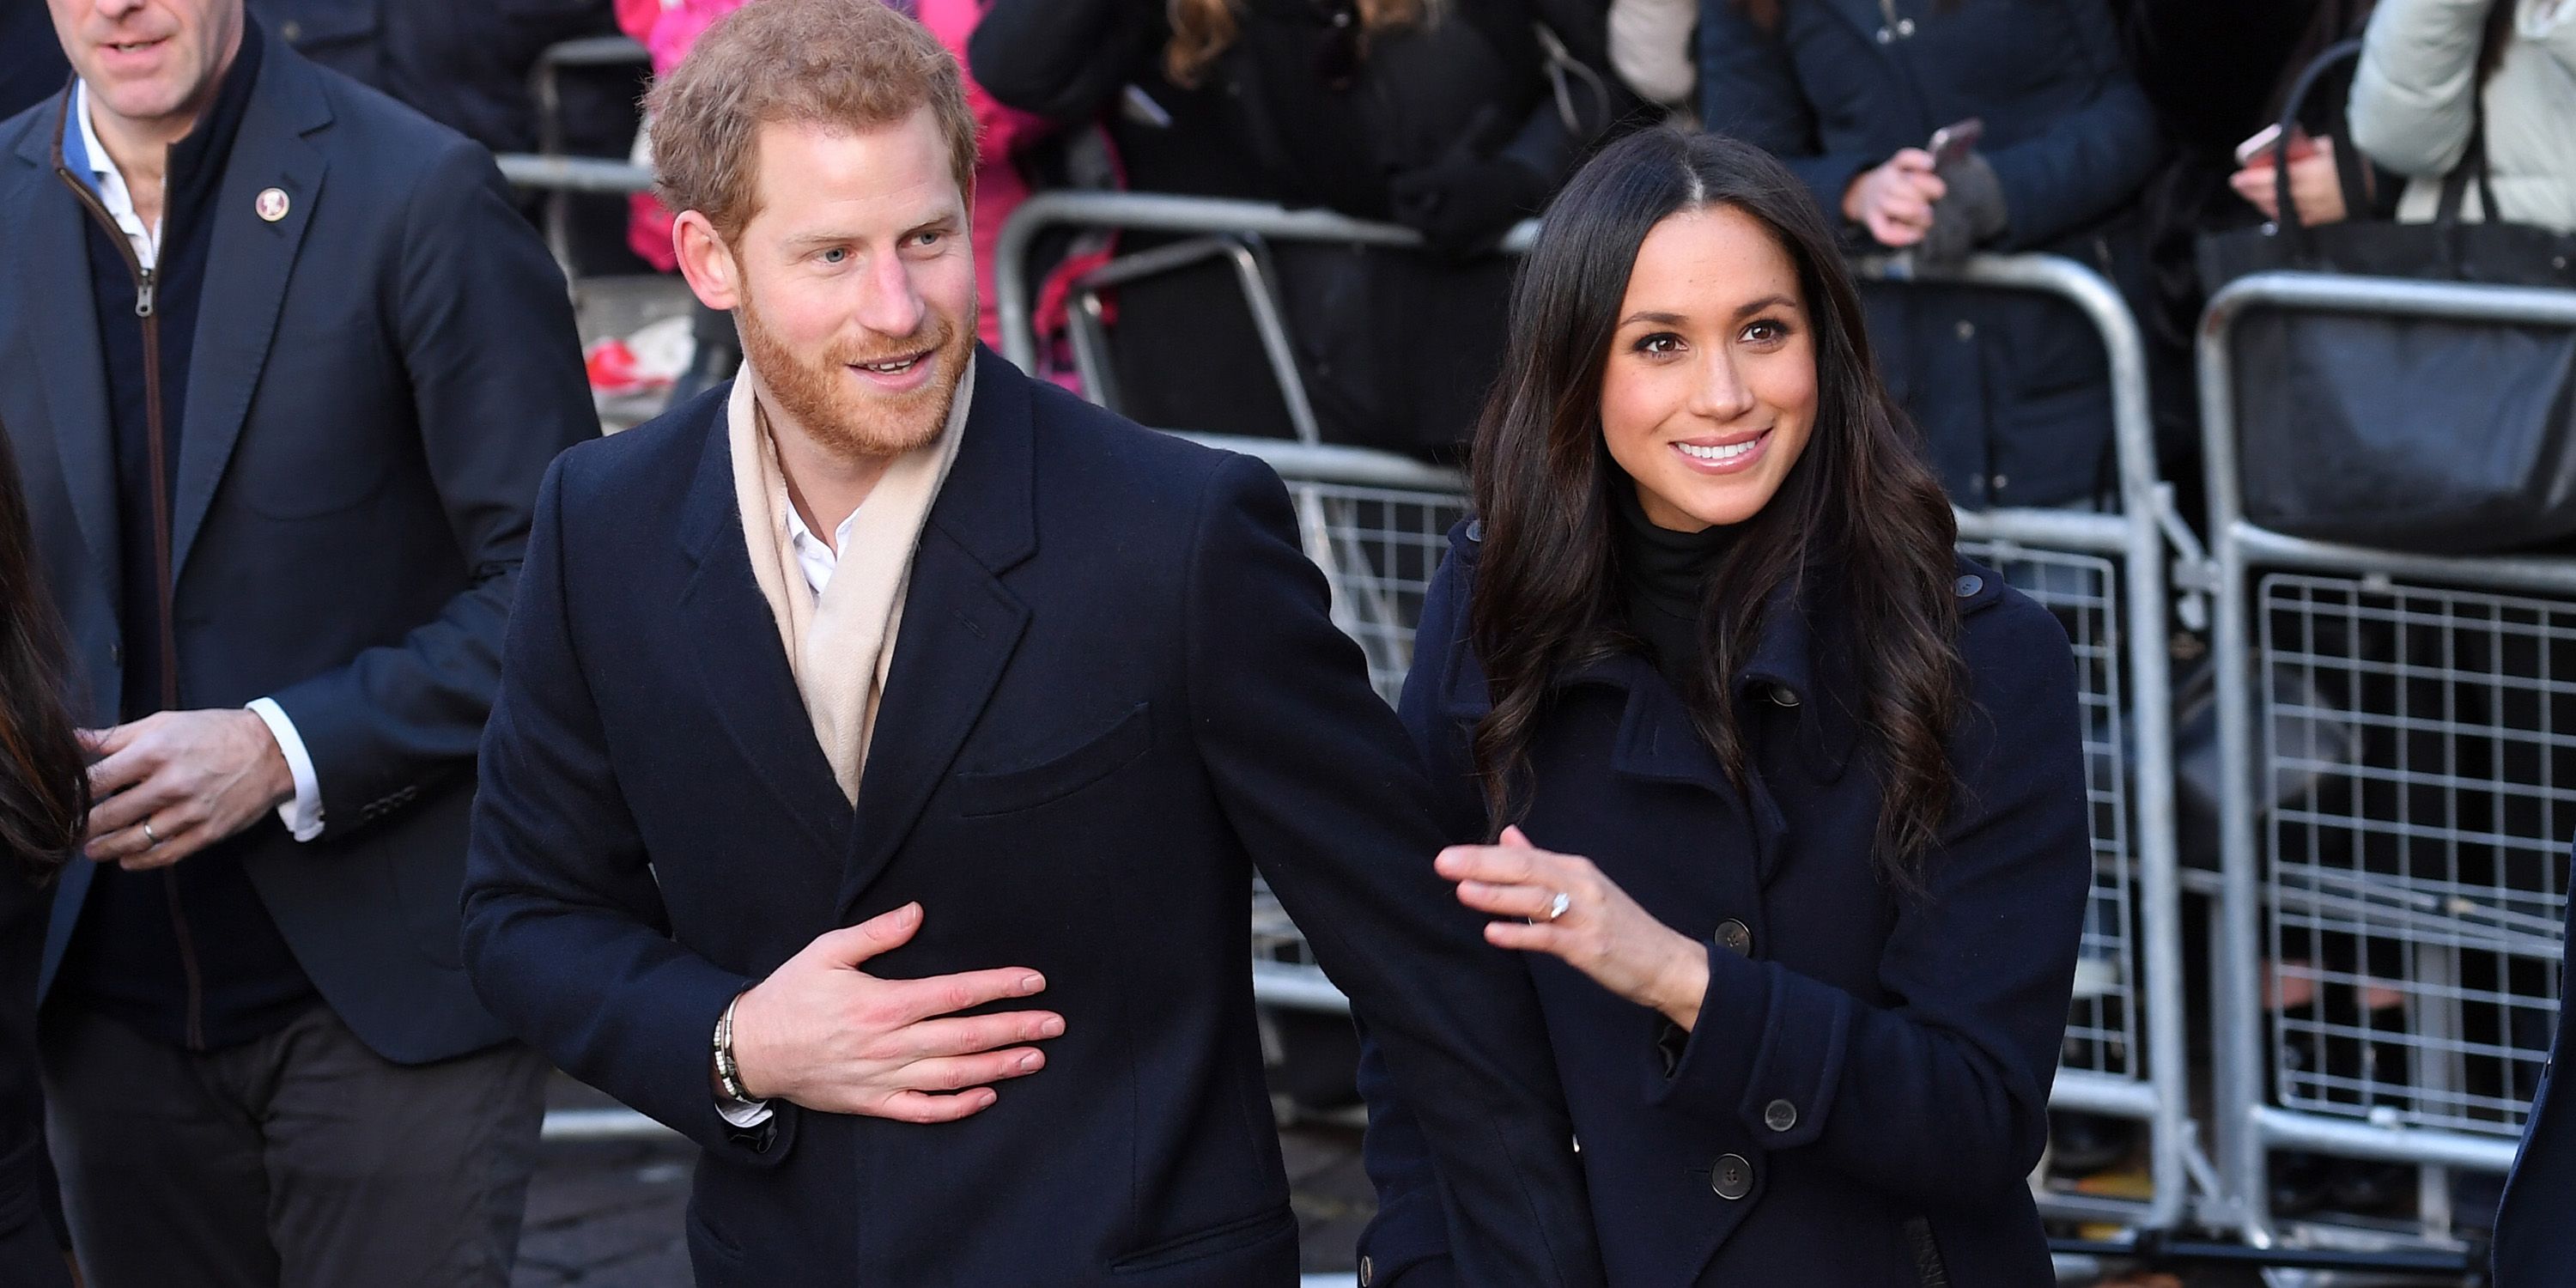 https://hips.hearstapps.com/hmg-prod.s3.amazonaws.com/images/hbz-prince-harry-meghan-markle-cute-moments-gettyimages-883511868-1523378902.jpg?crop=1xw:1xh;center,top